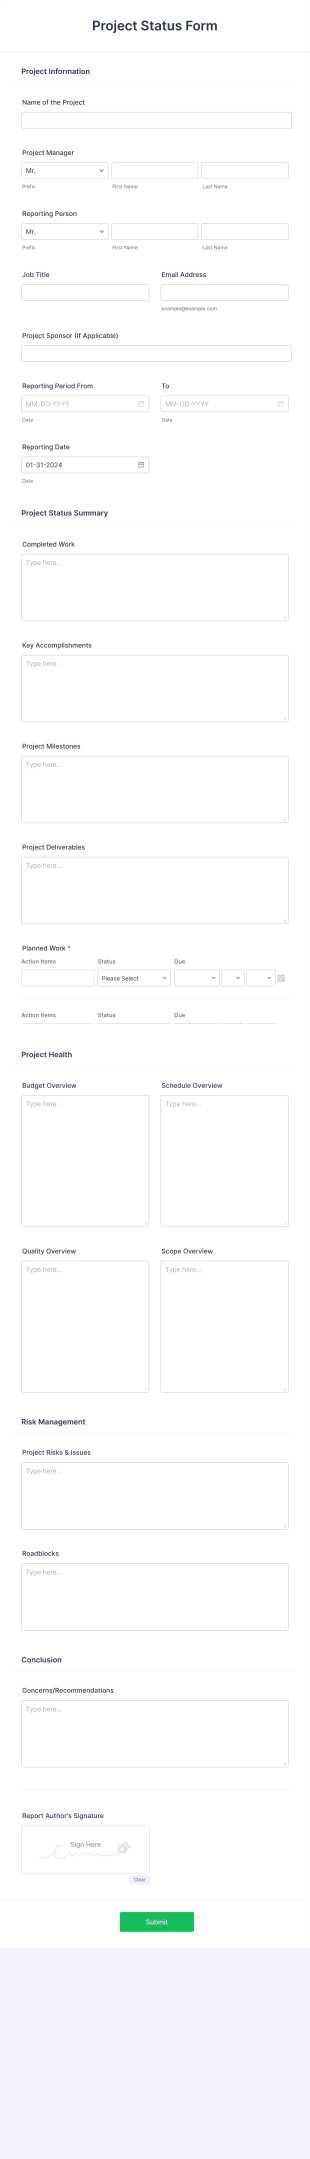 Project Status Form Template